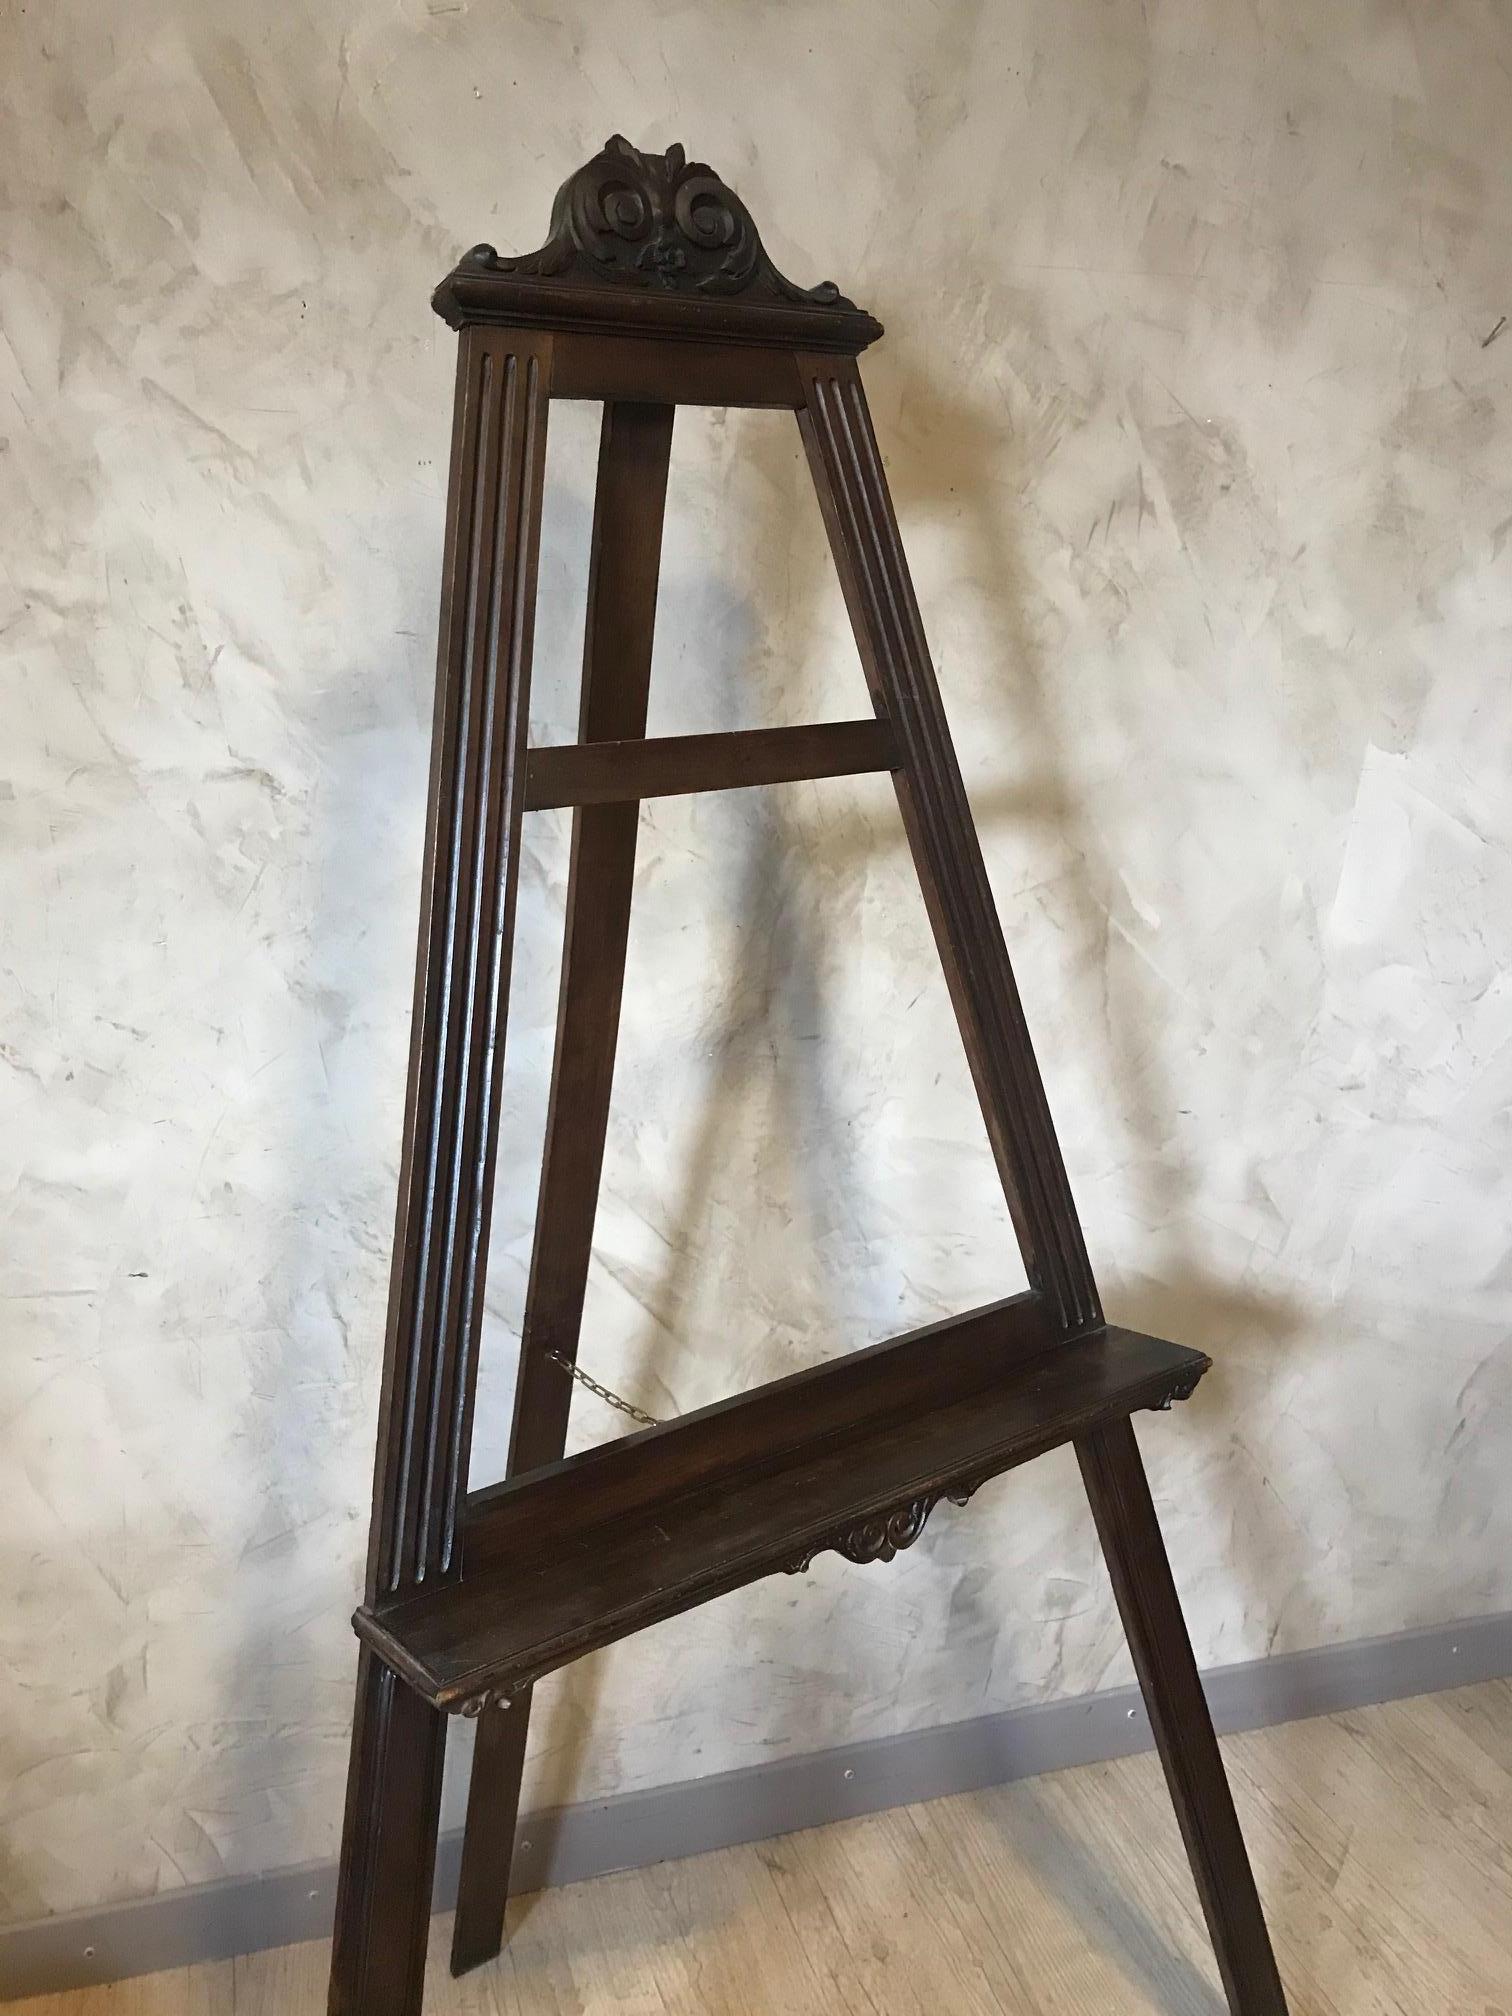 Very nice early 20th century French walnut easel from the 1900s. 
Can be closed to save space and there is a brass chain to keep the easel open. 
The shell at the top has been broken. 
Good quality. 
Can hold a large painting.